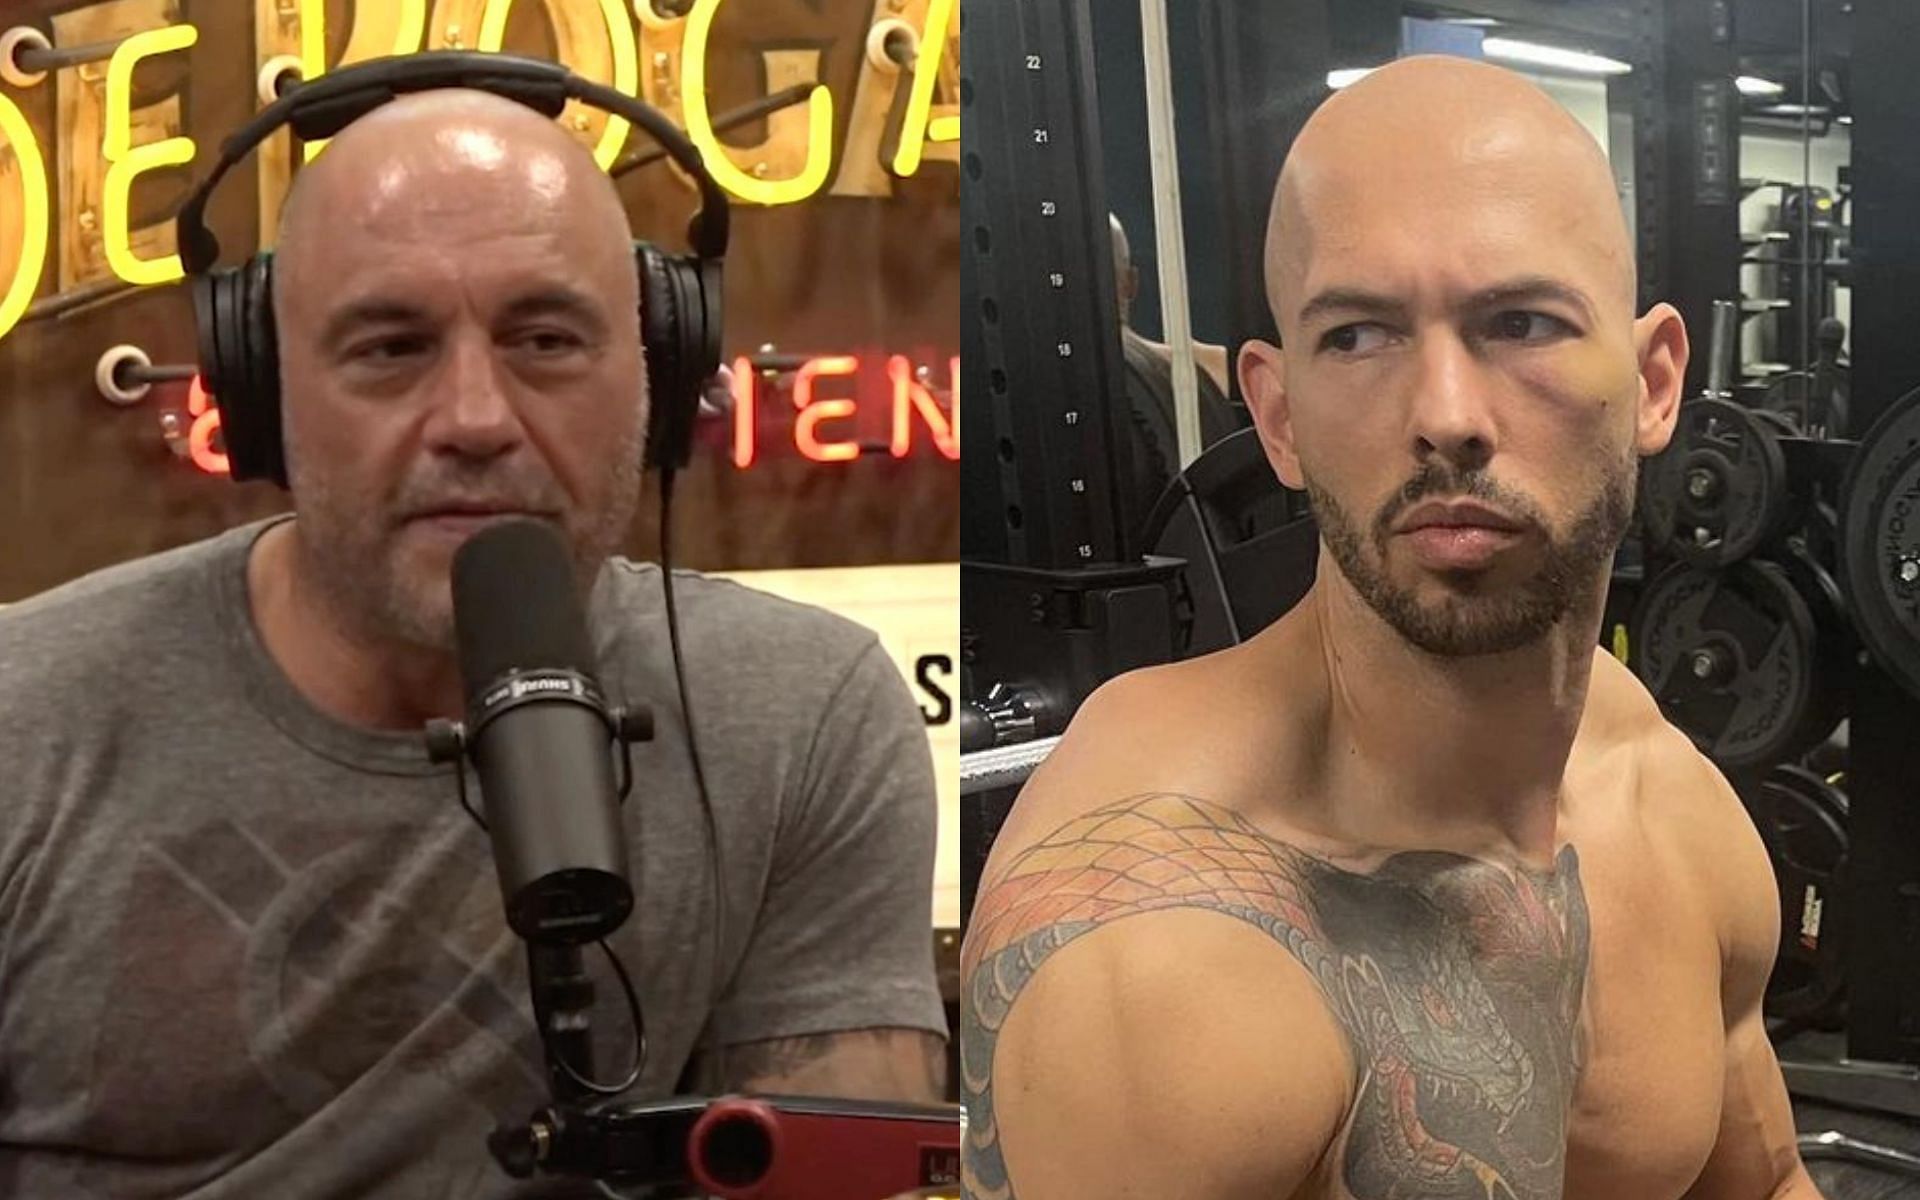 Joe Rogan (left) and Andrew Tate (right) [Photo credit: @cobratate on Instagram]